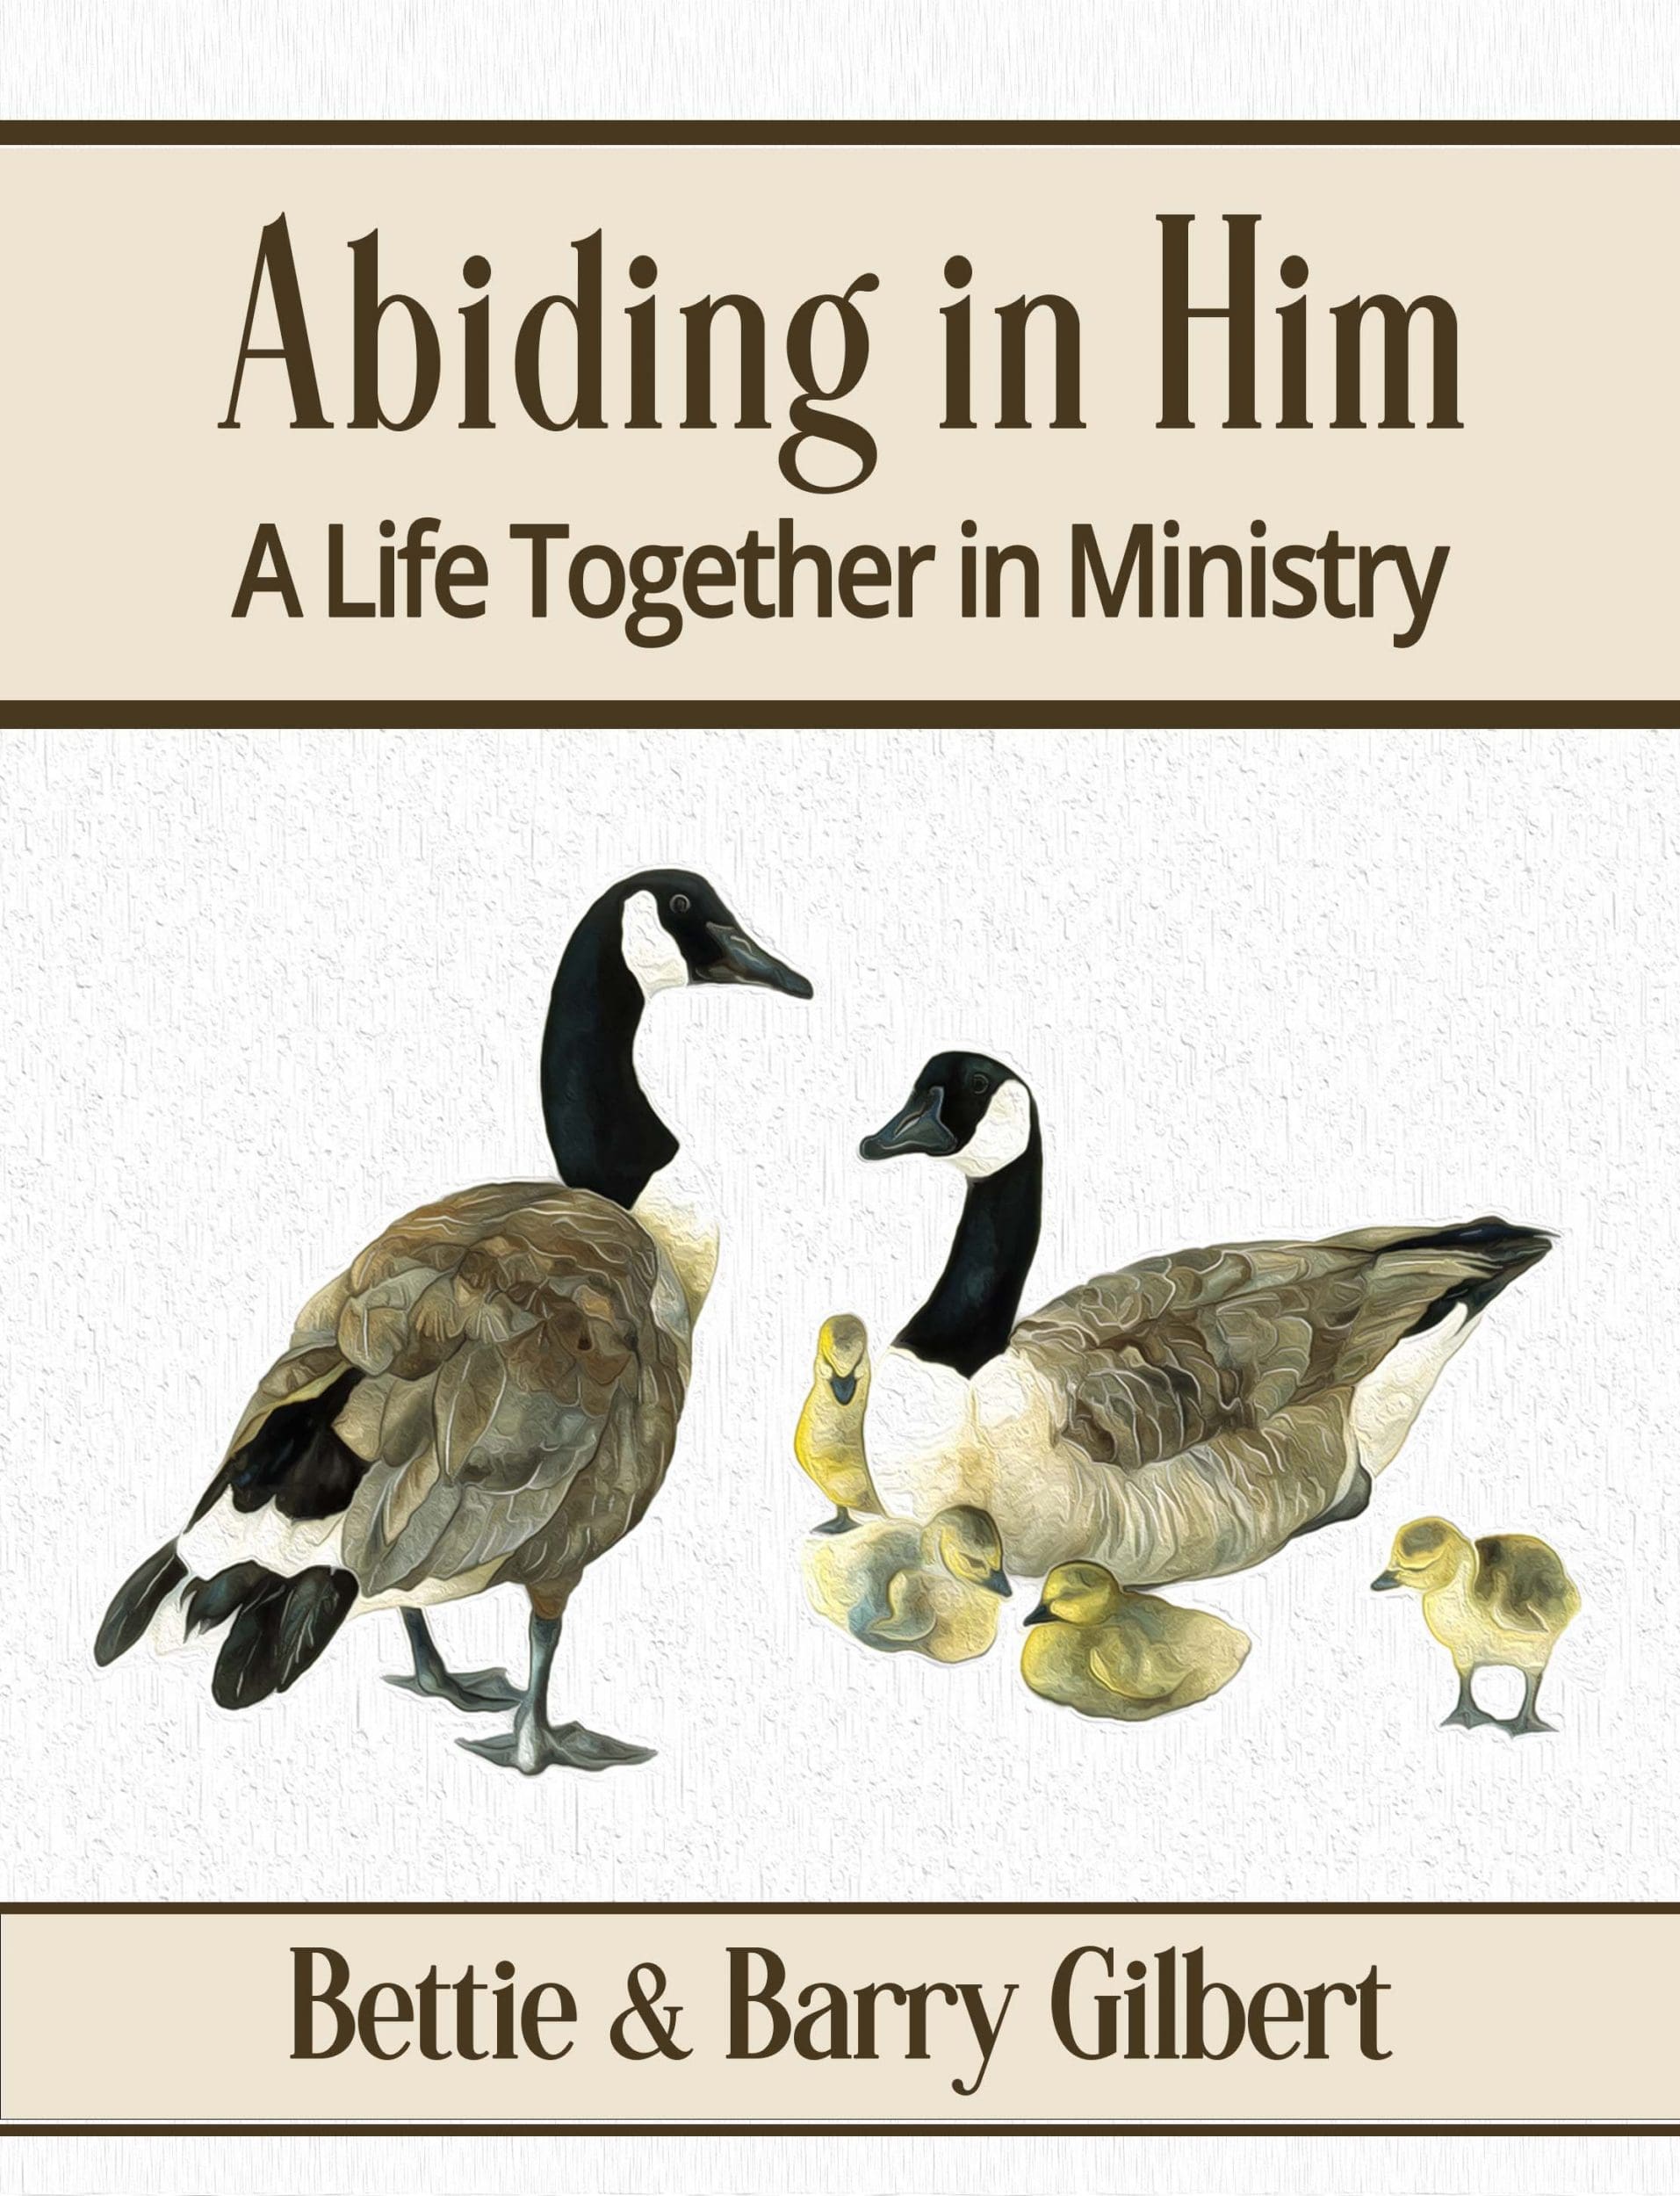 Abiding in Him: A Life Together in Ministry